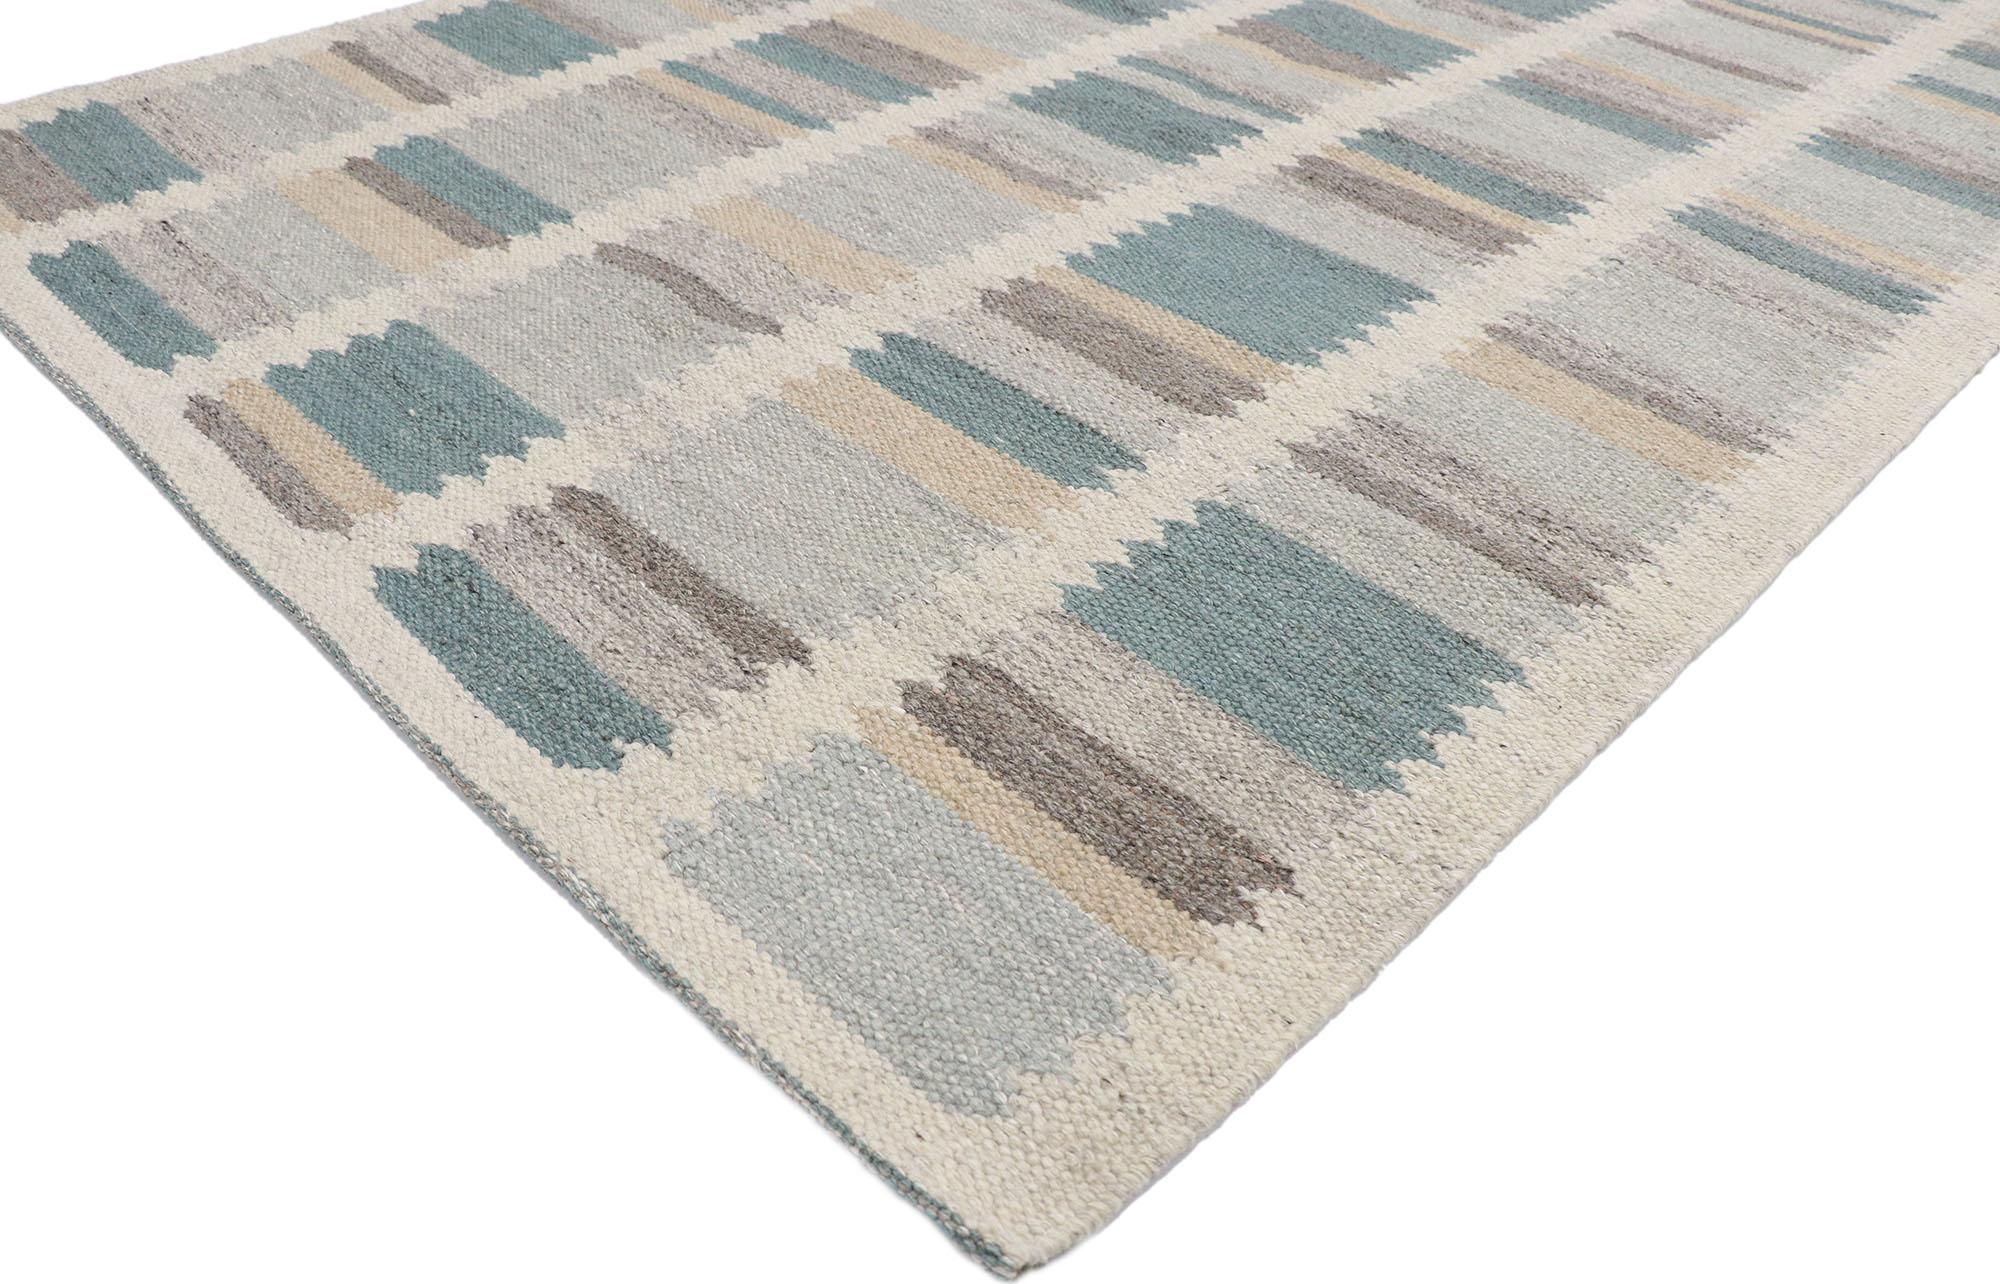 30655 New Swedish Inspired Kilim Rug with Scandinavian Modern Style 05'05 x 08'00. With its geometric design and bohemian hygge vibes, this hand-woven wool Swedish Indian Kilim rug beautifully embodies the simplicity of Scandinavian modern style. It